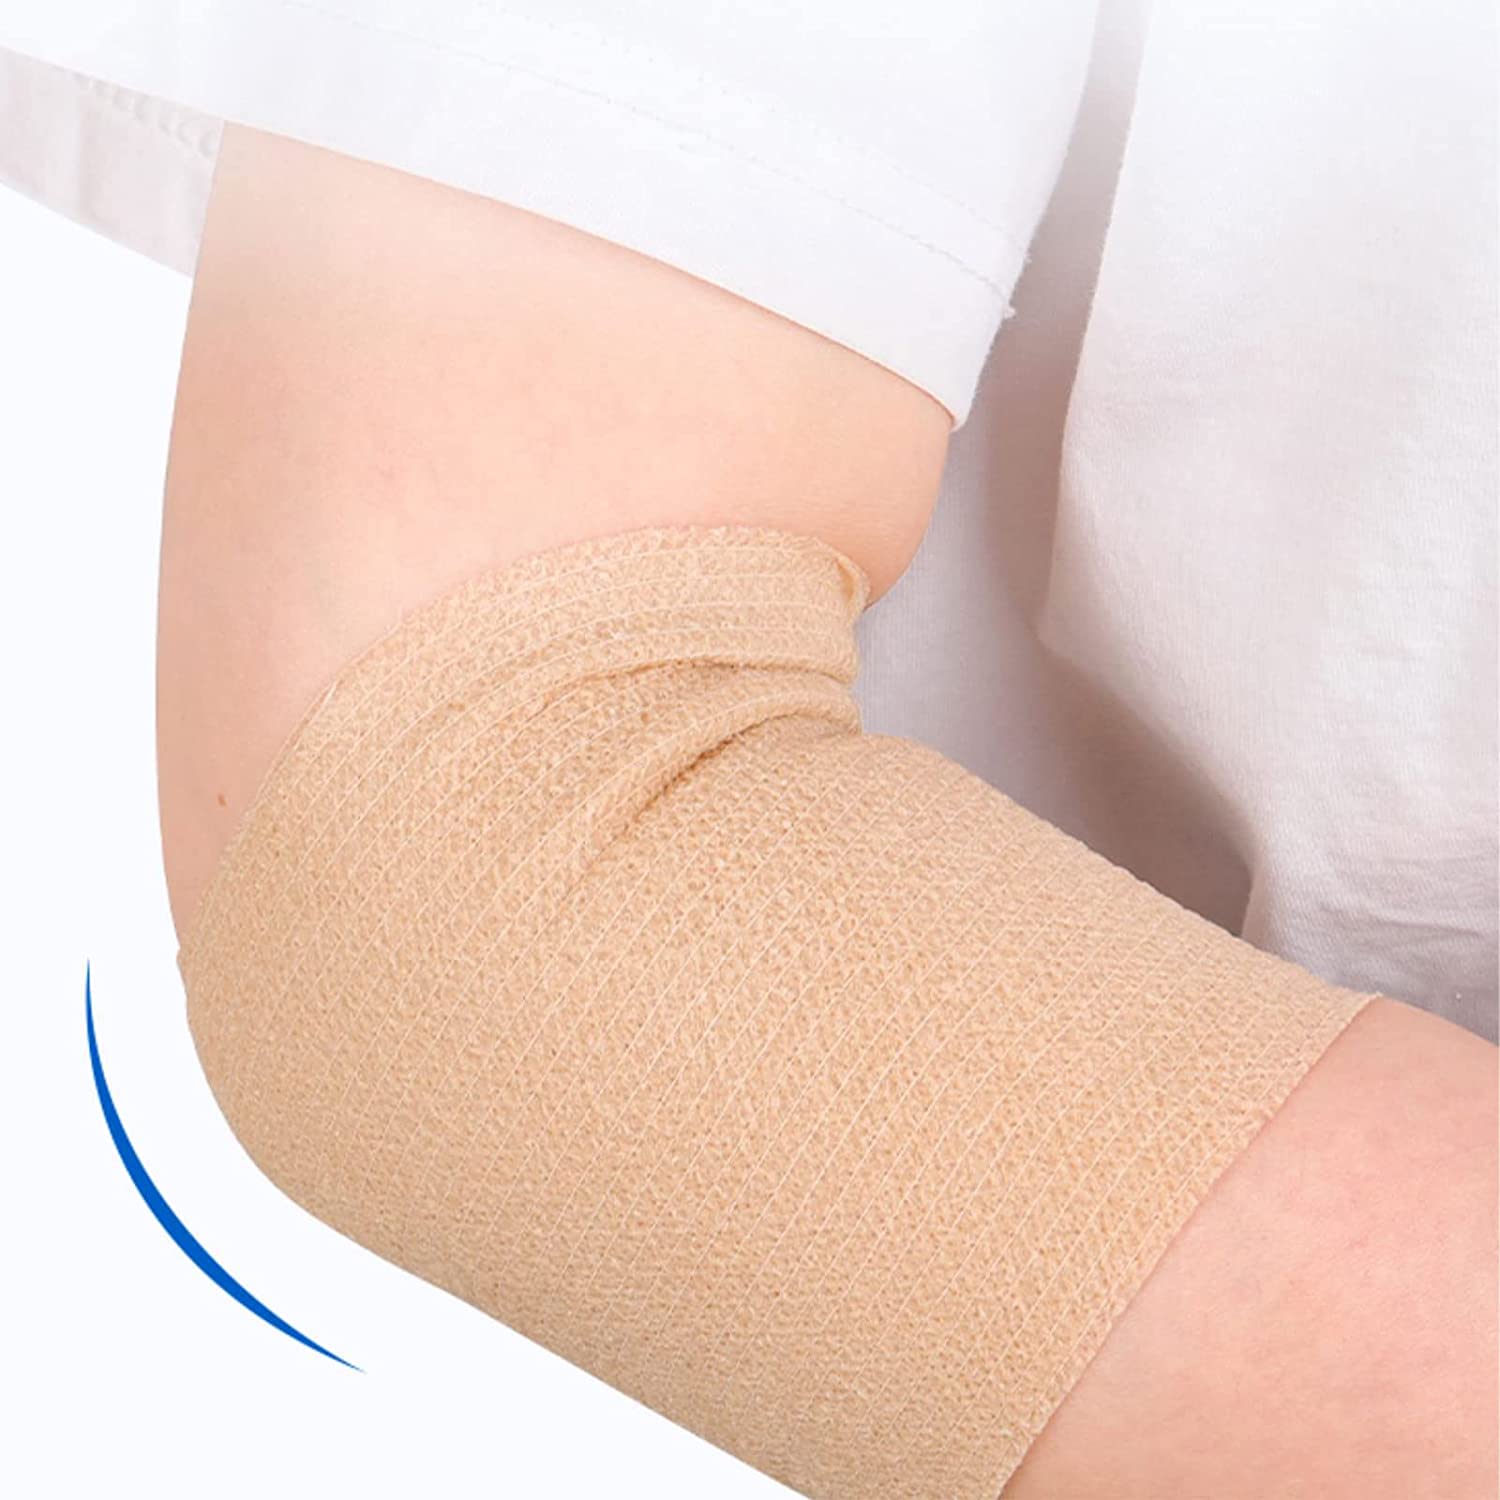 3 Inch 5 Yards Self Adherent Wrap bandage , Athletic Elastic Non Woven Cohesive Bandage – for Sports, First Aid Medical